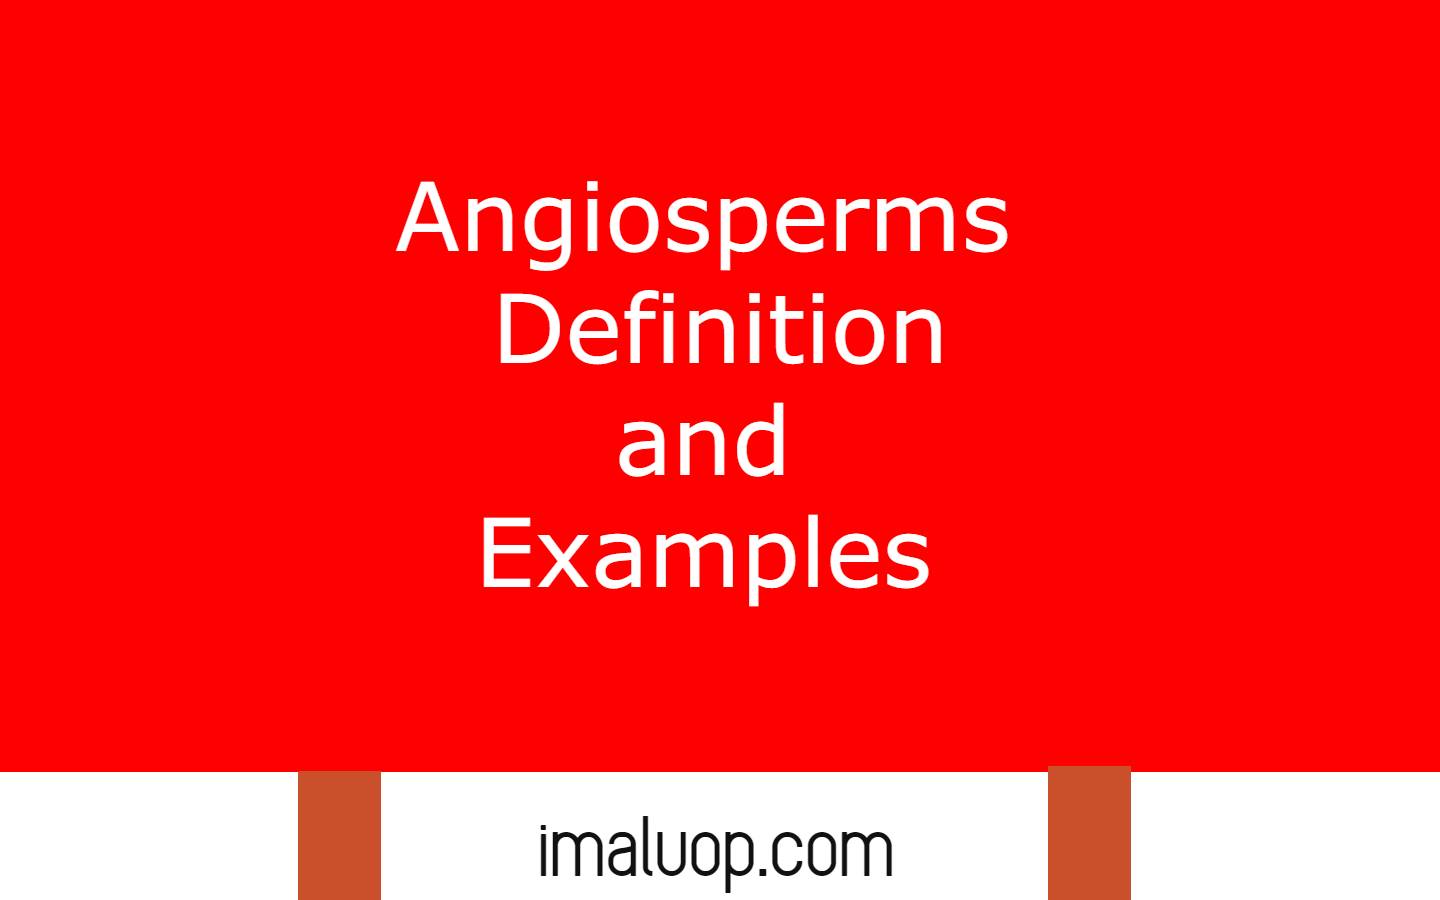 Angiosperms Definition and Examples